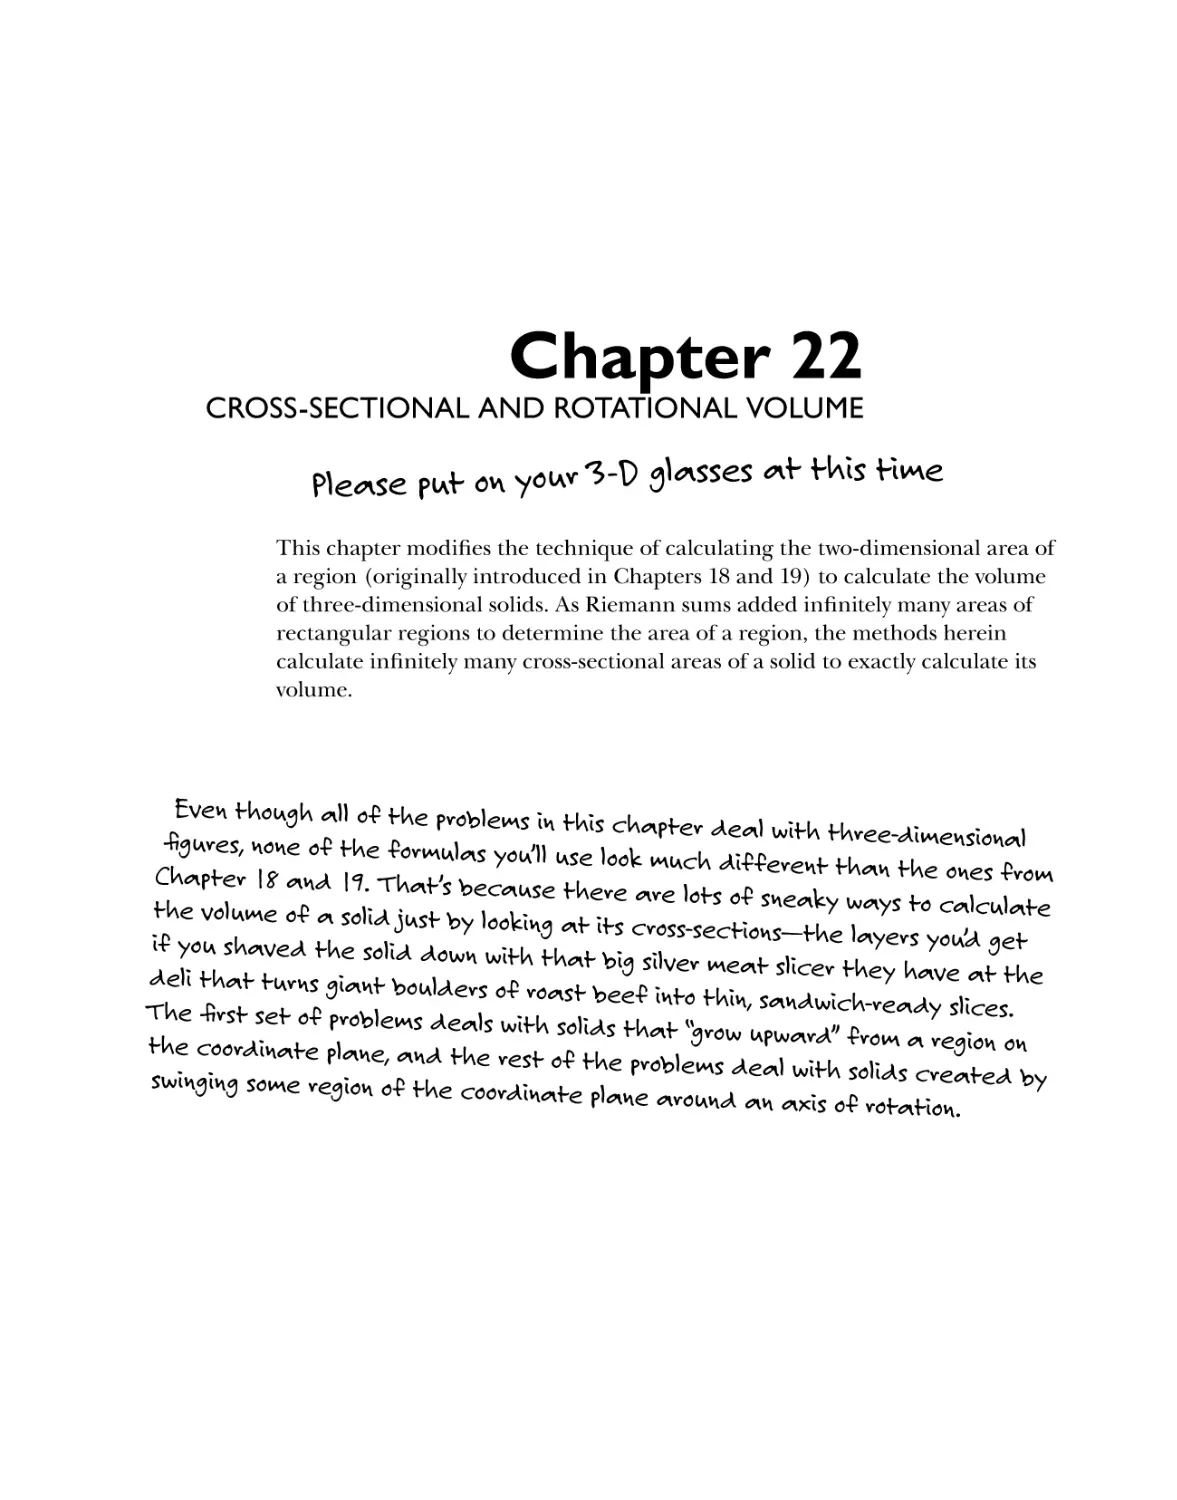 Chapter 22: Cross-Sectional and Rotational Volume 389